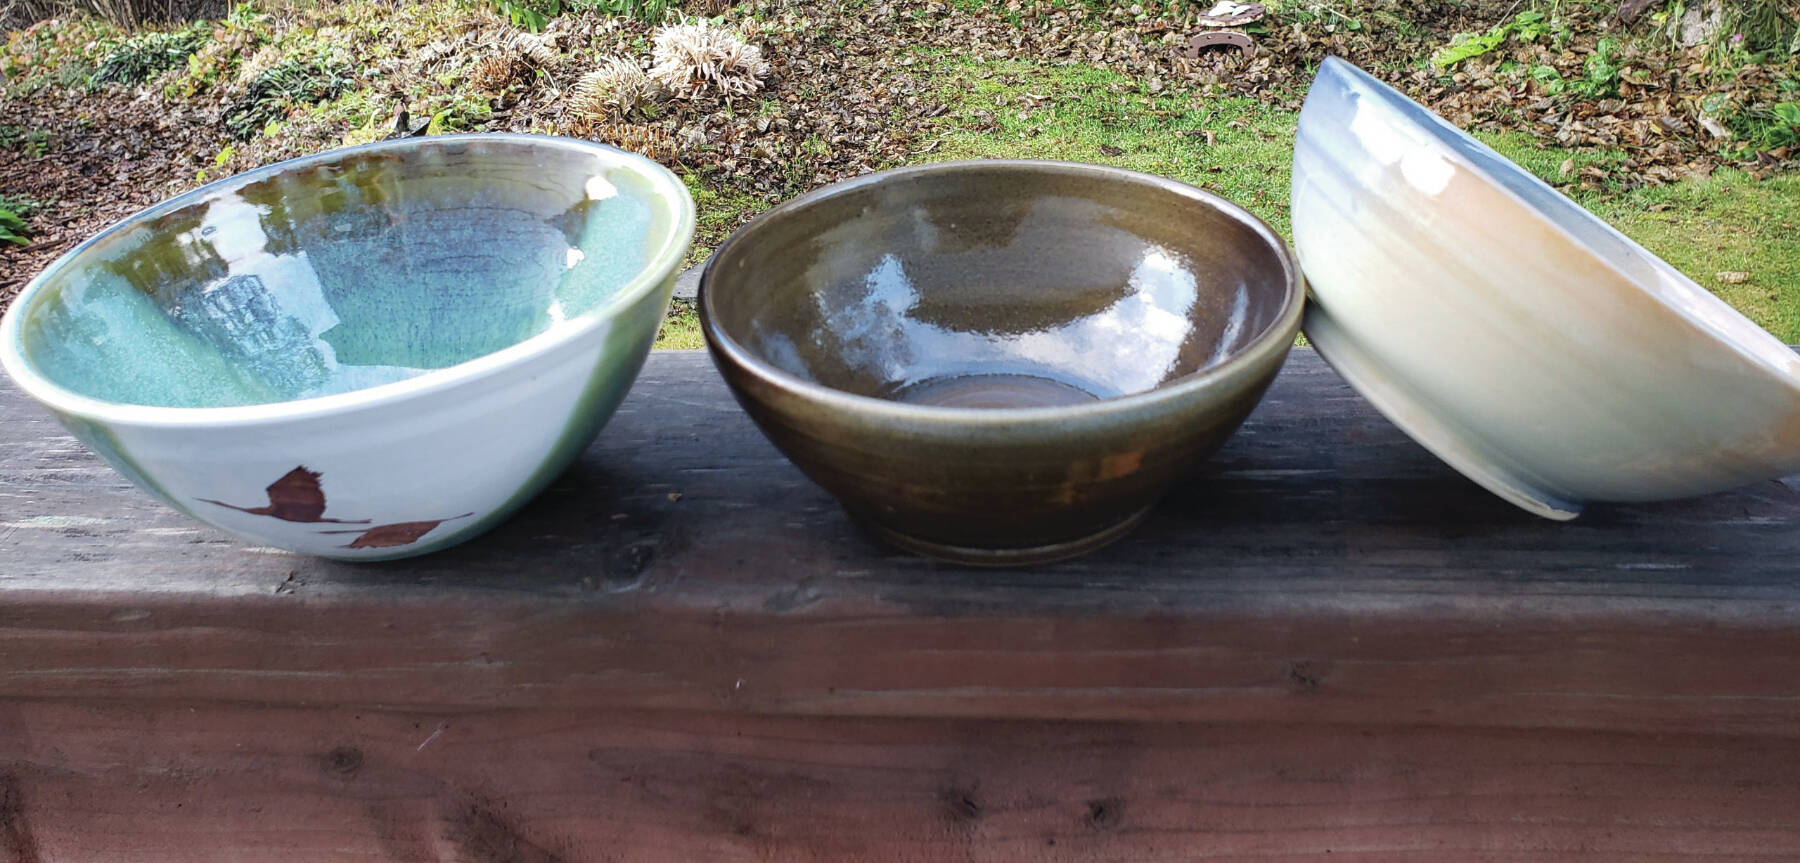 Bowls created by local ceramic artists will be available for purchase at the Homer Food Pantry Empty Bowl fundraiser event on Nov. 10 at Homer United Method Church.  Photo provided by Tracy Asselin.